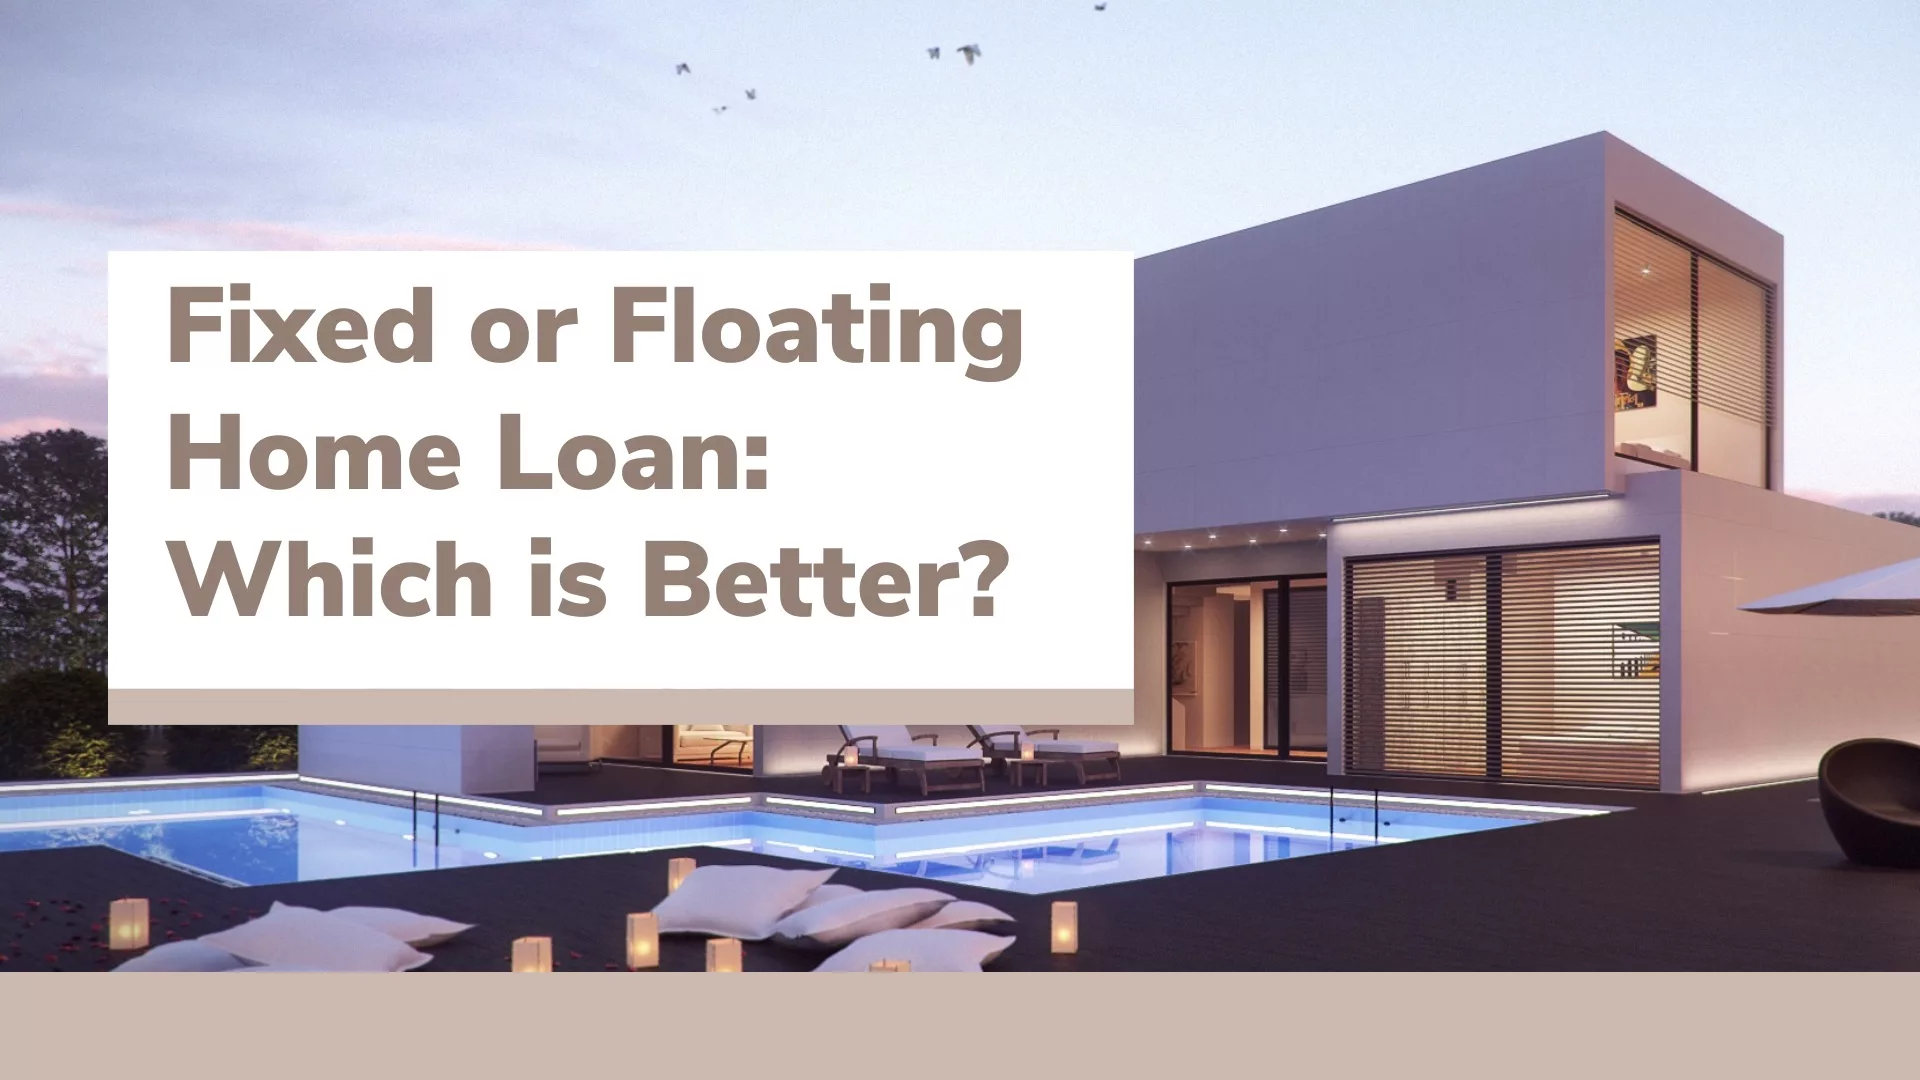 Fixed or Floating Home Loan: Which is Better?